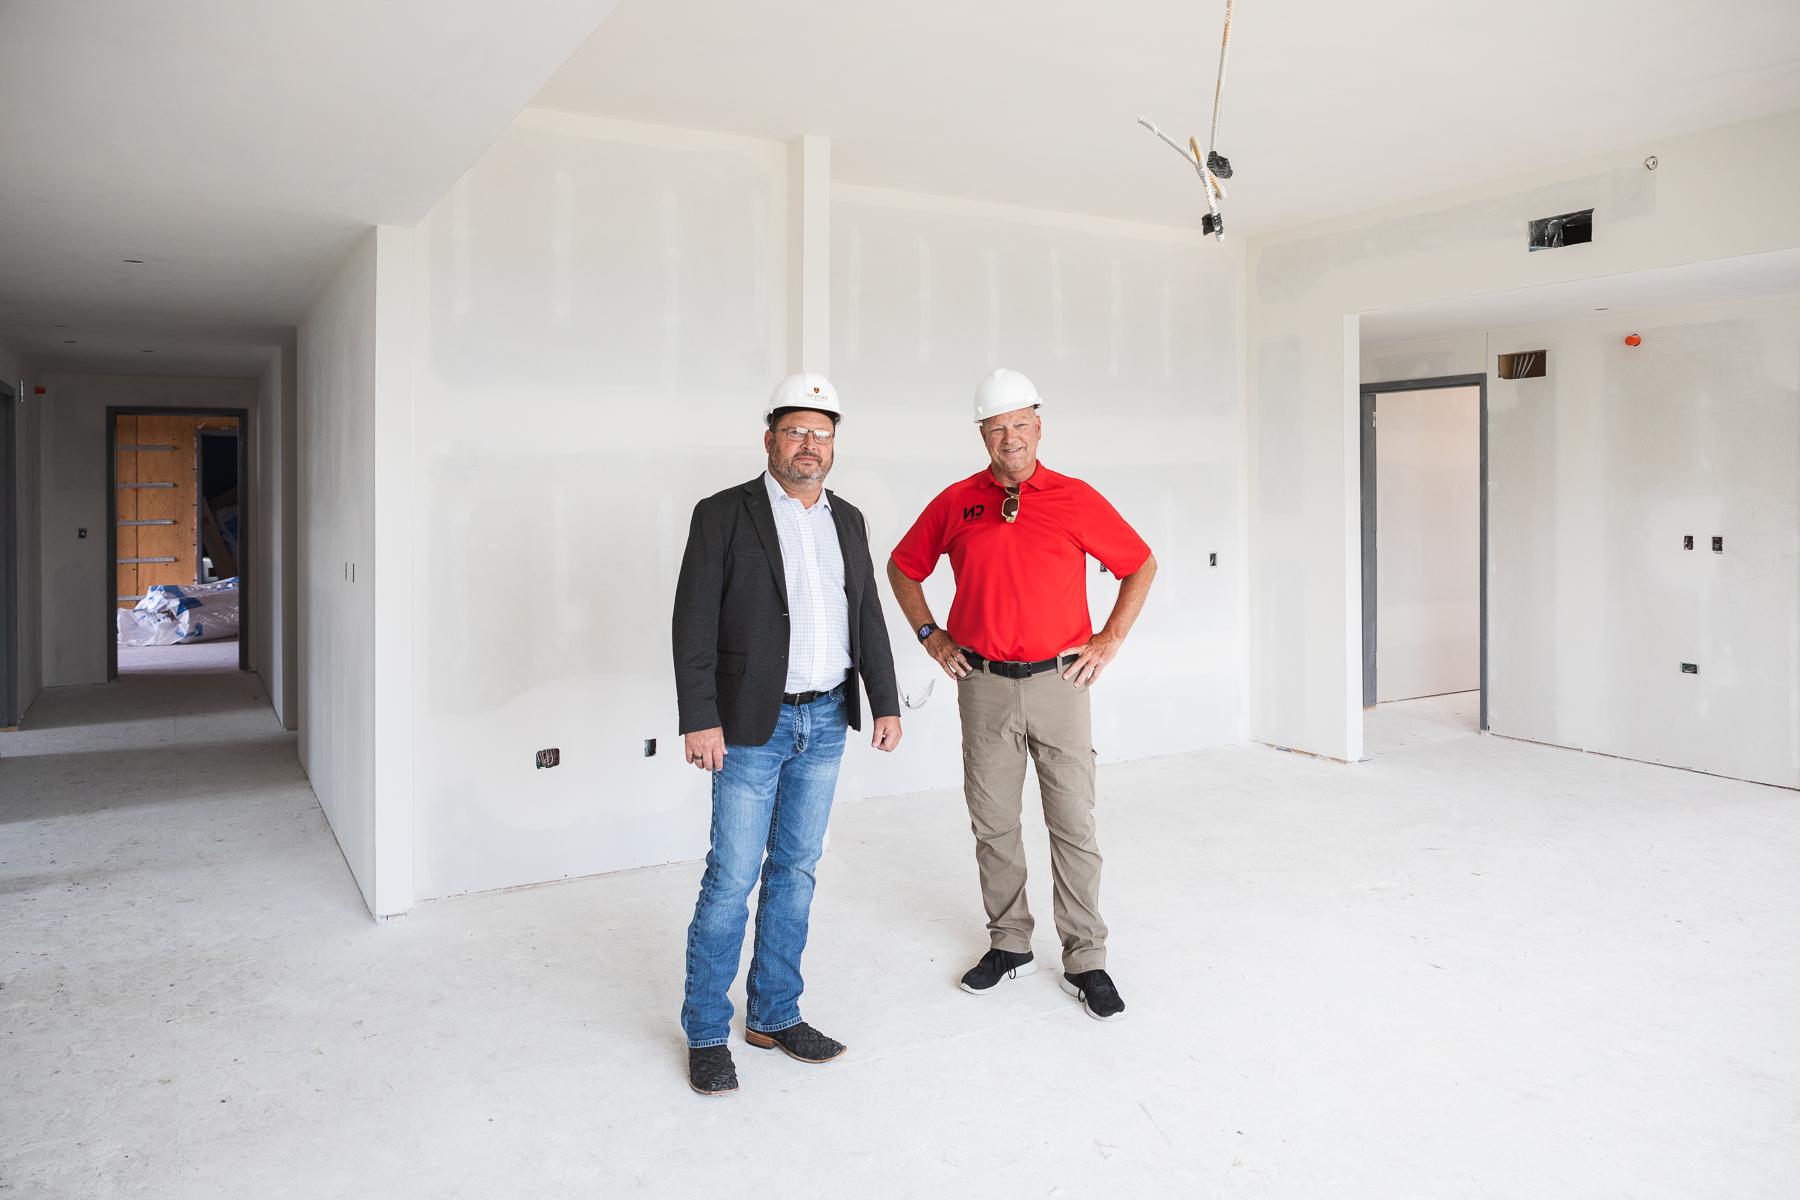 Kevin Zadina, publisher of the Crete News, stands to the left of Brian Flesner during a tour for the news publication of Doane's new residence hall. The two stand in what will be the kitchenette and living space of one of the six eight-person suites located in the residence hall. 